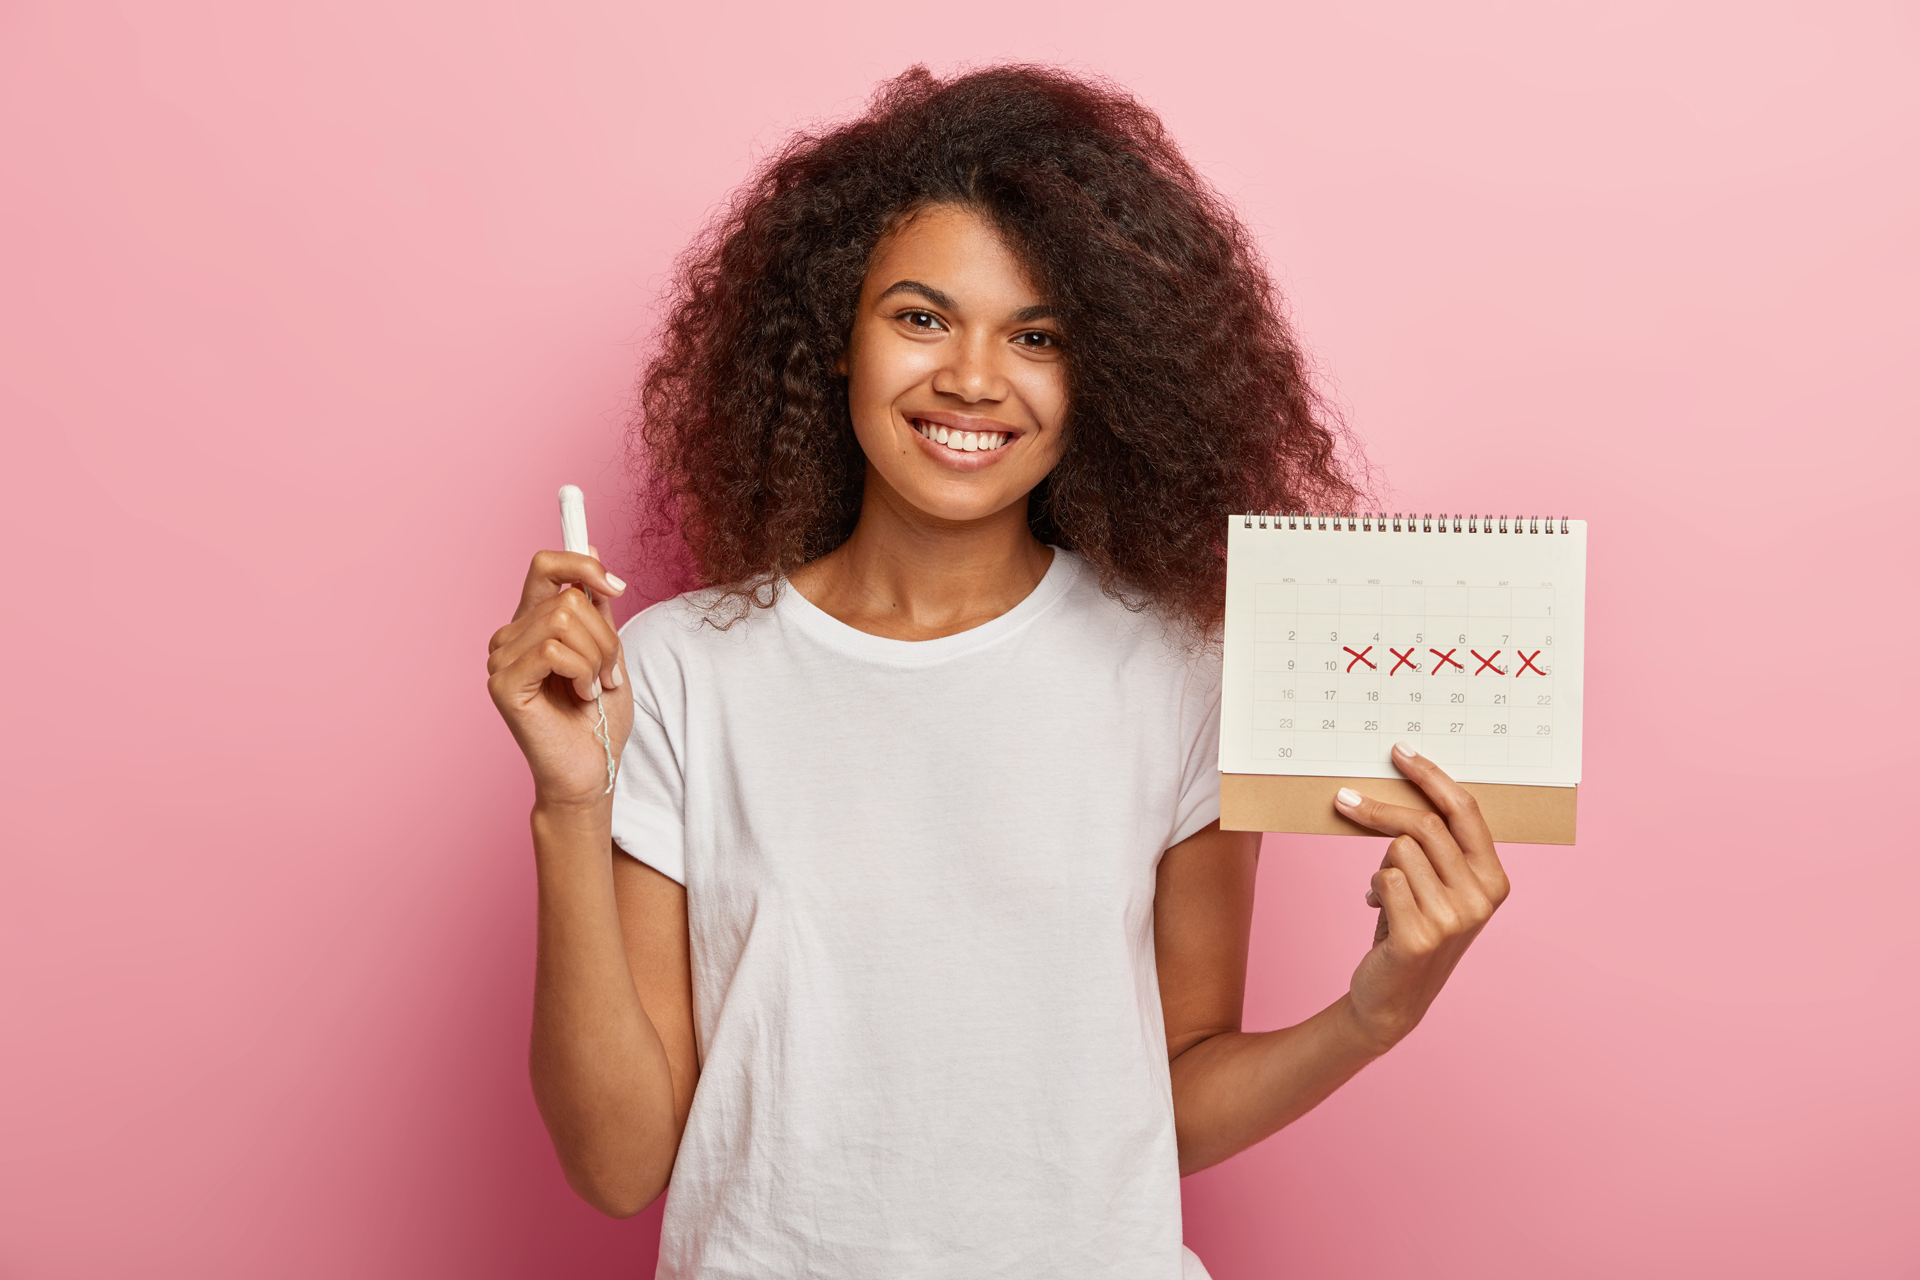 A woman holding a calendar and a tampon